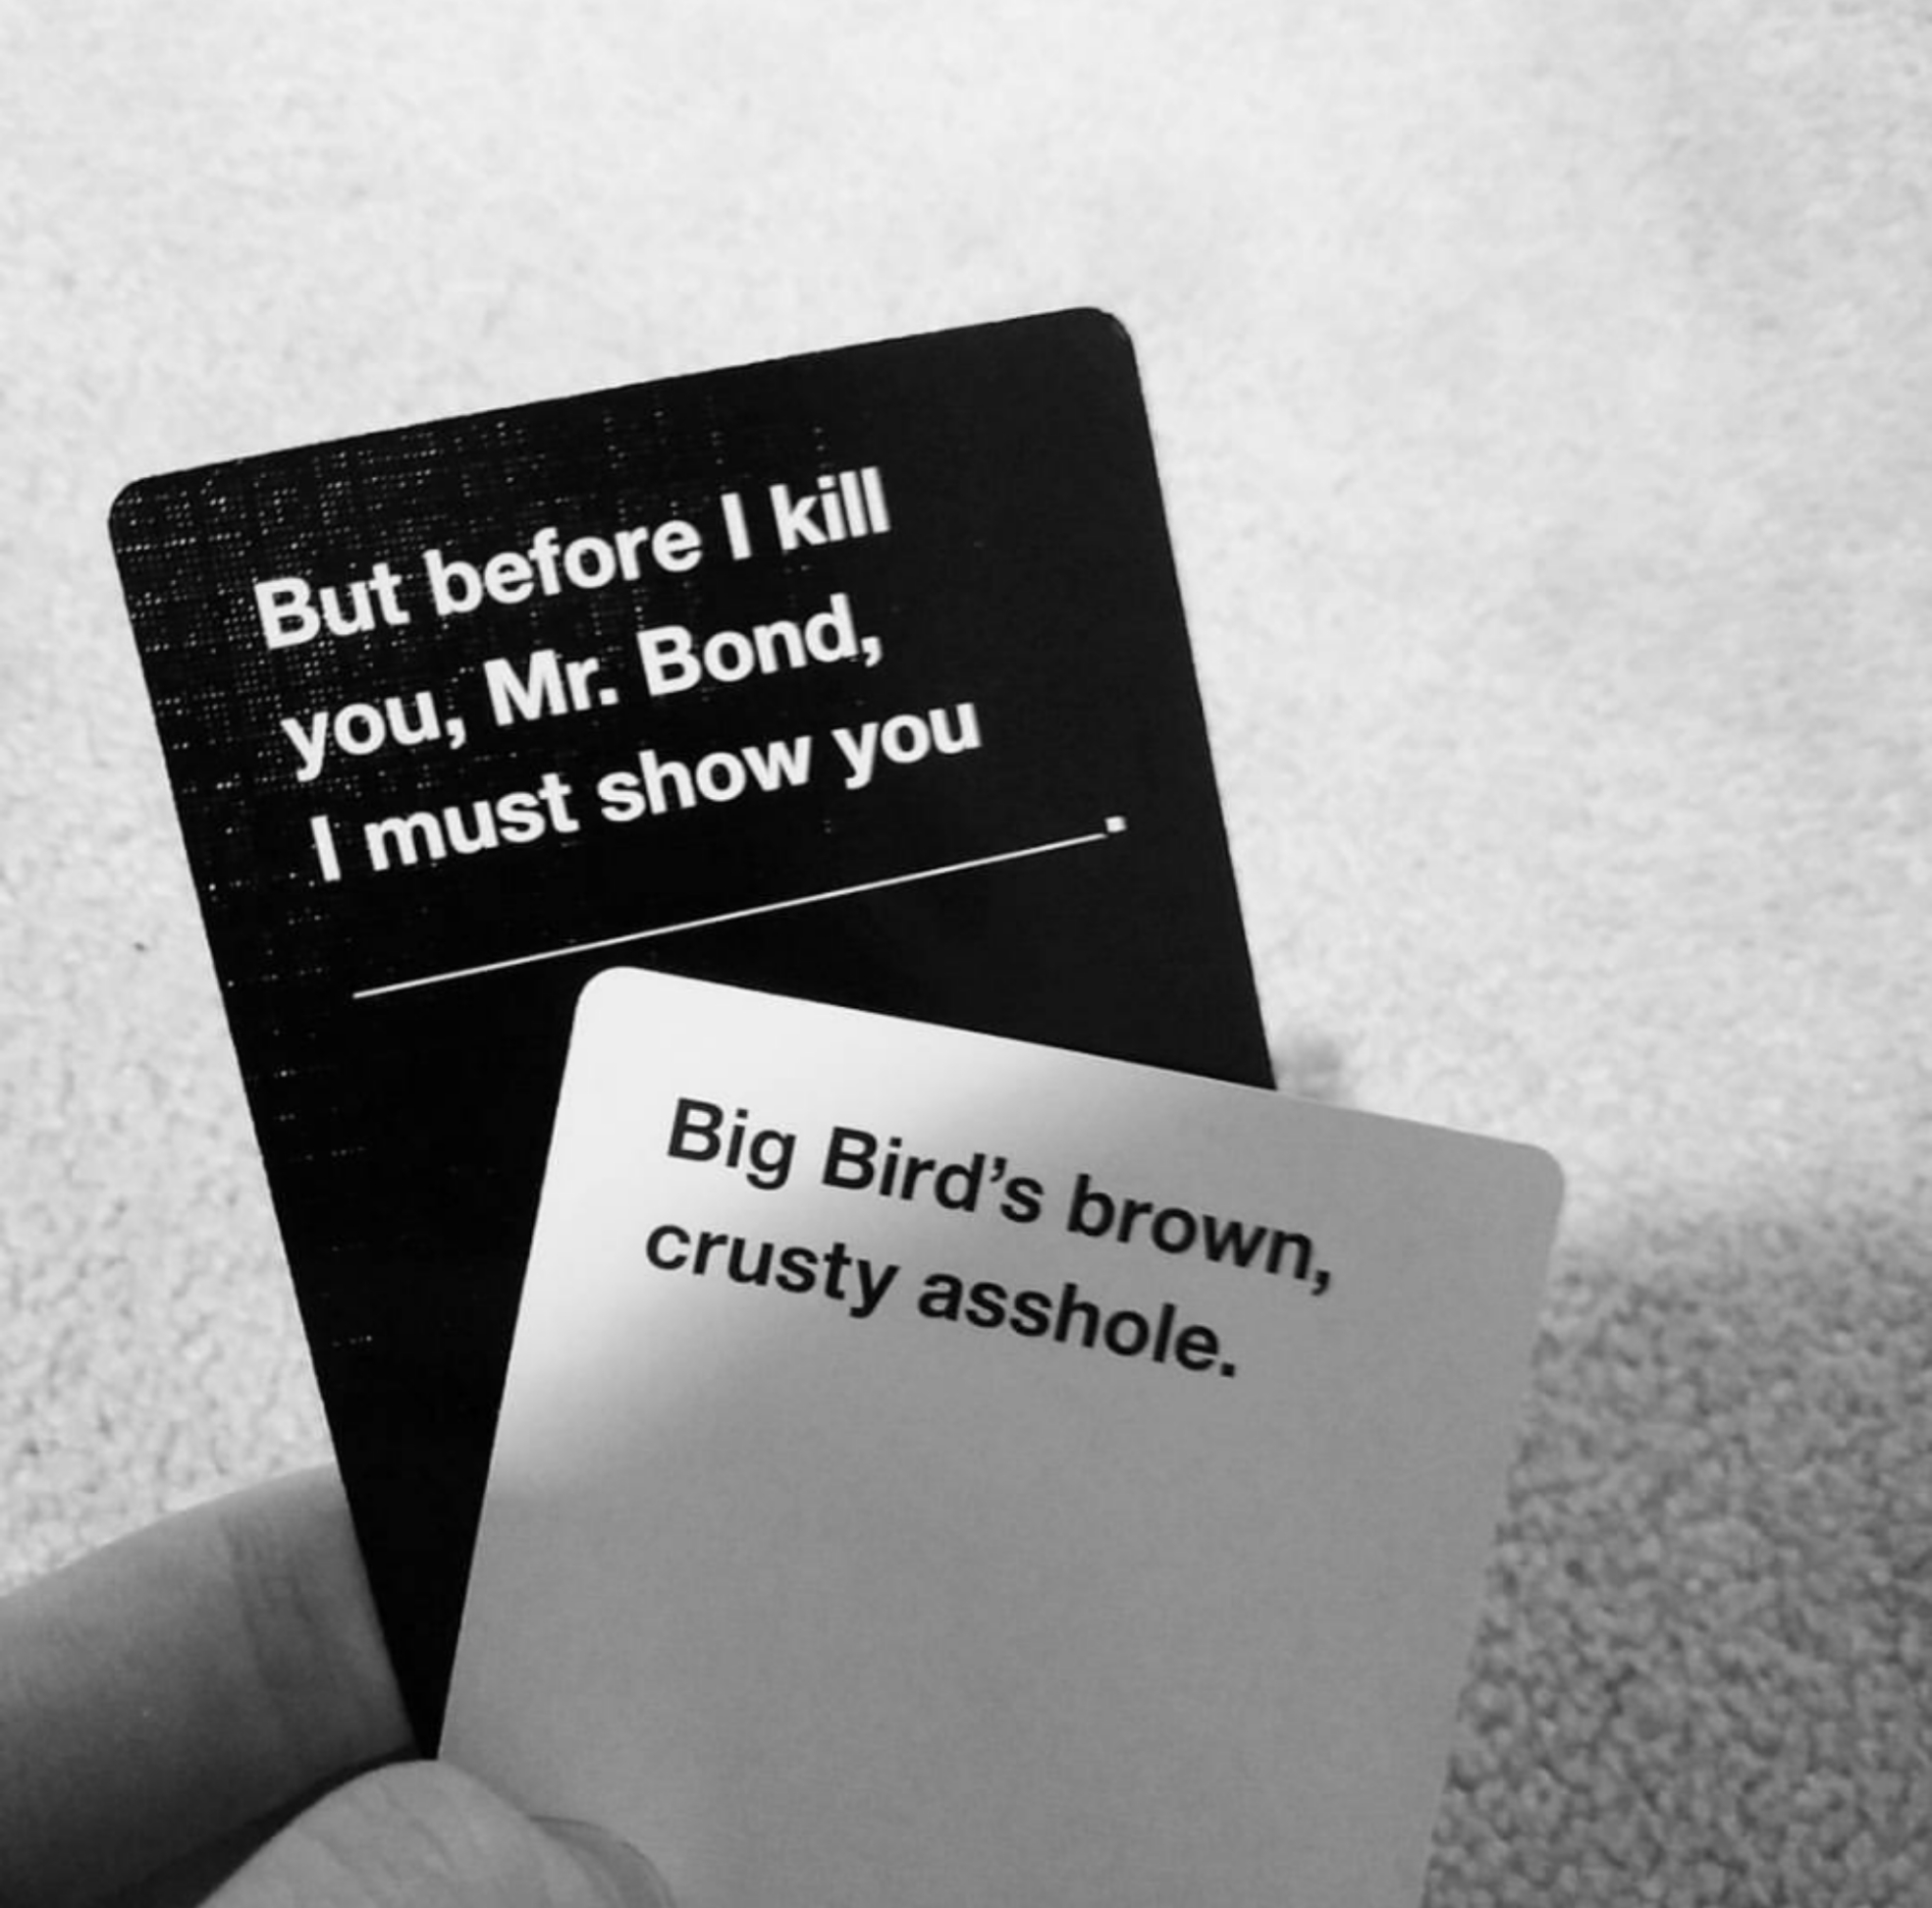 cursed memes - cards against humanity - But before I kill you, Mr. Bond, I must show you Big Bird's brown, crusty asshole.